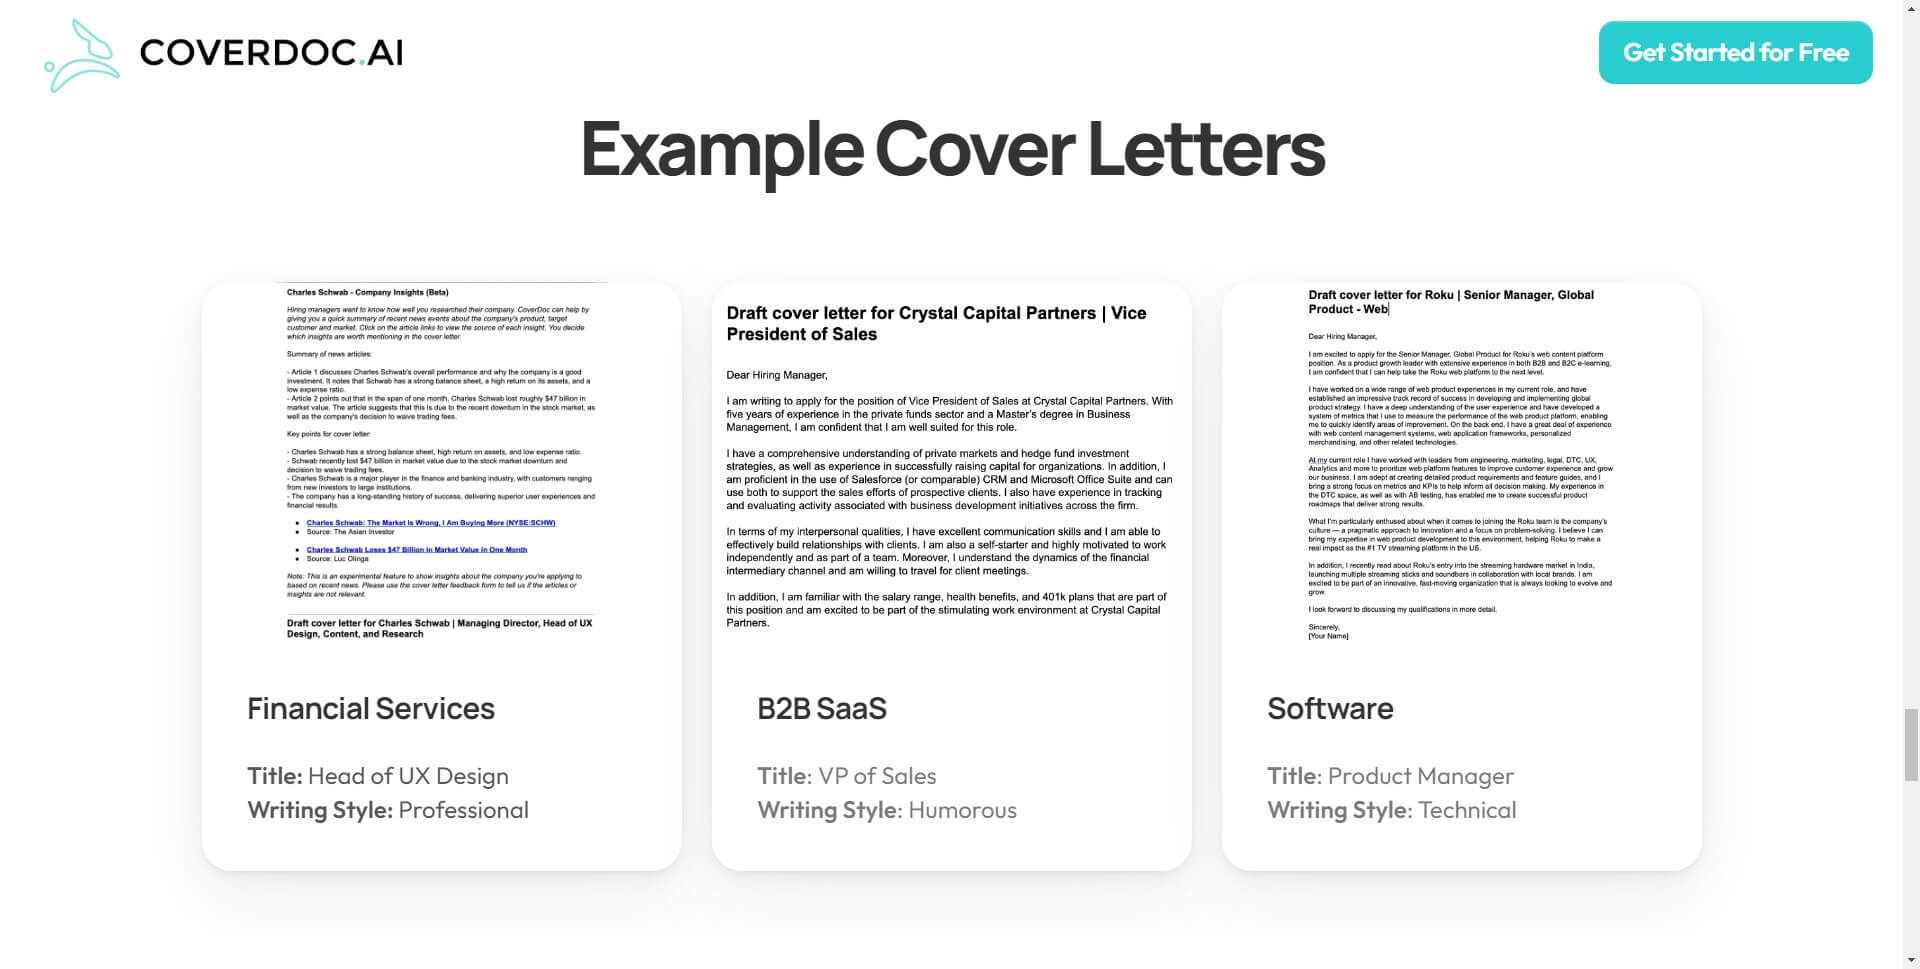 I used AI to write a cover letter for an application at Google.